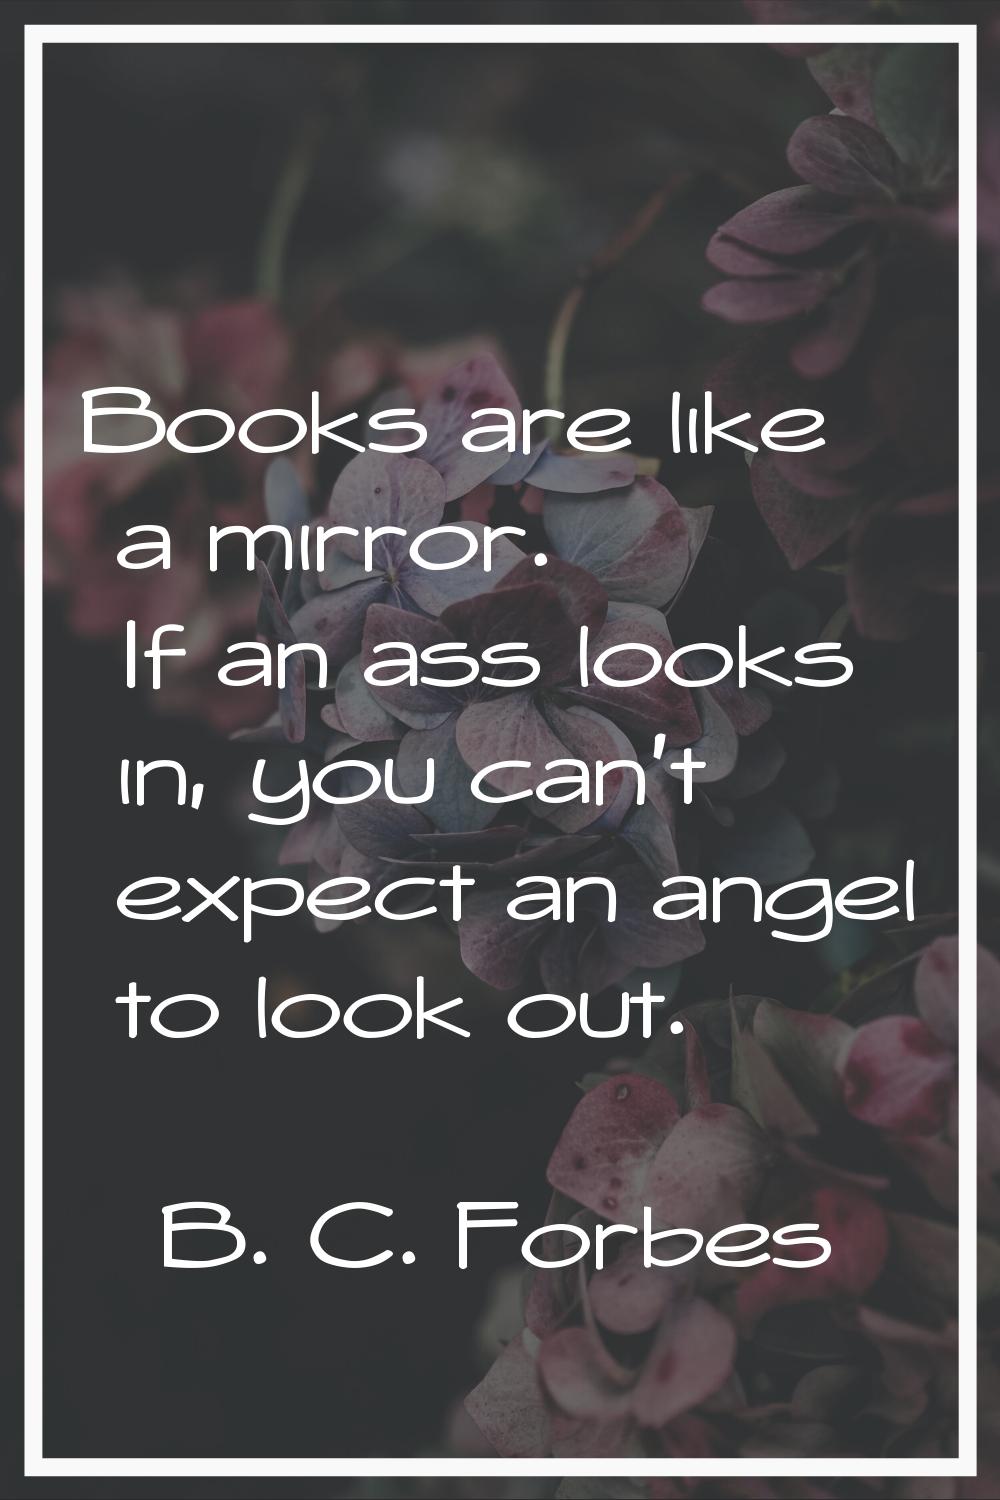 Books are like a mirror. If an ass looks in, you can't expect an angel to look out.